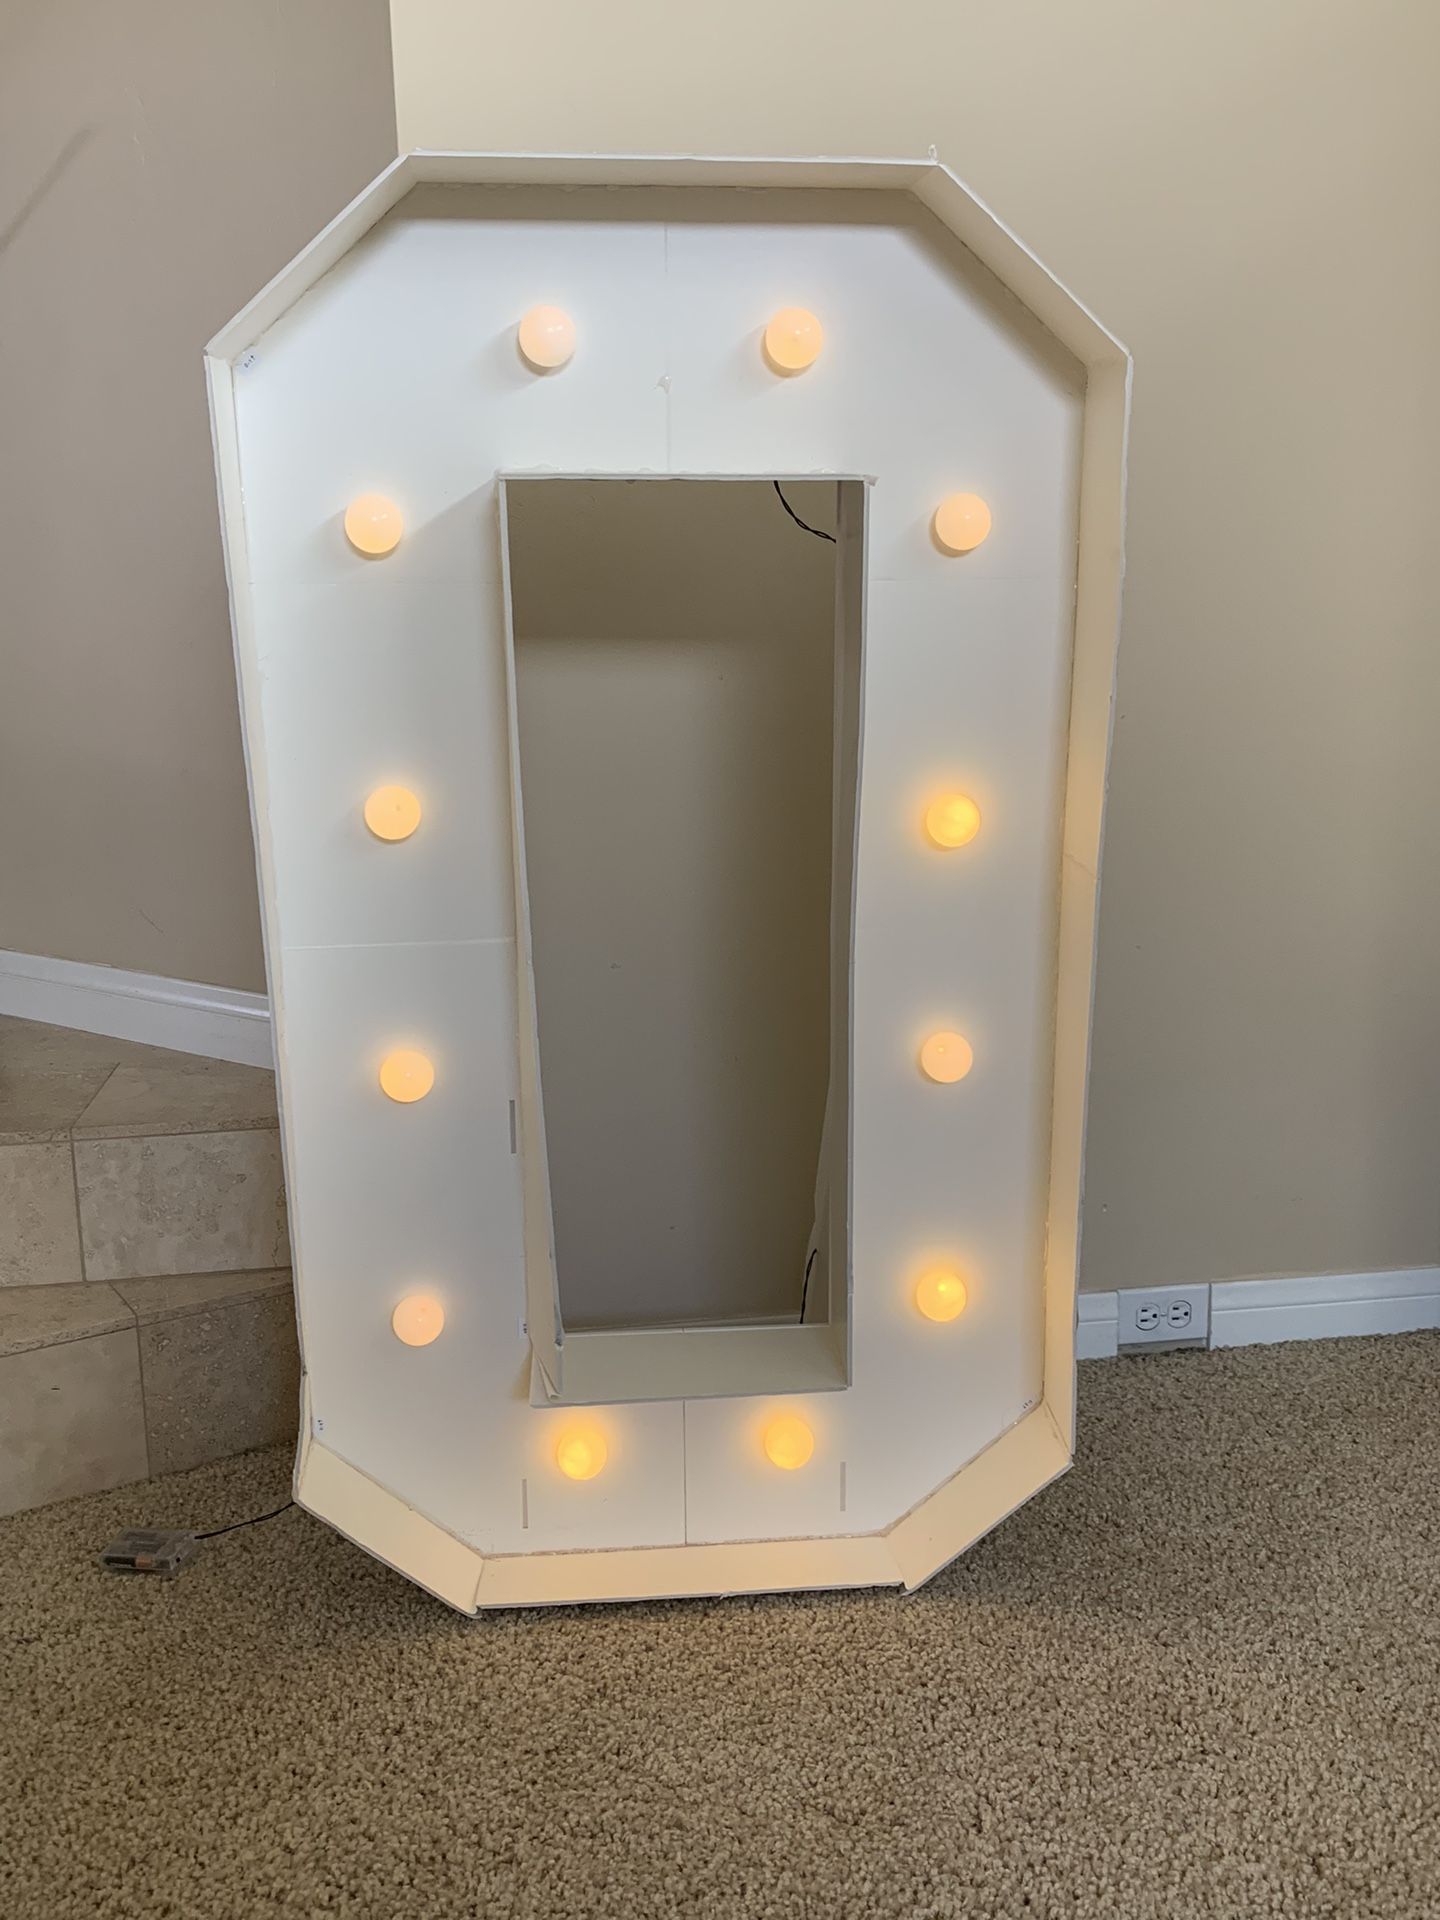 4ft Marquee Light Up Number “0” Assembled 